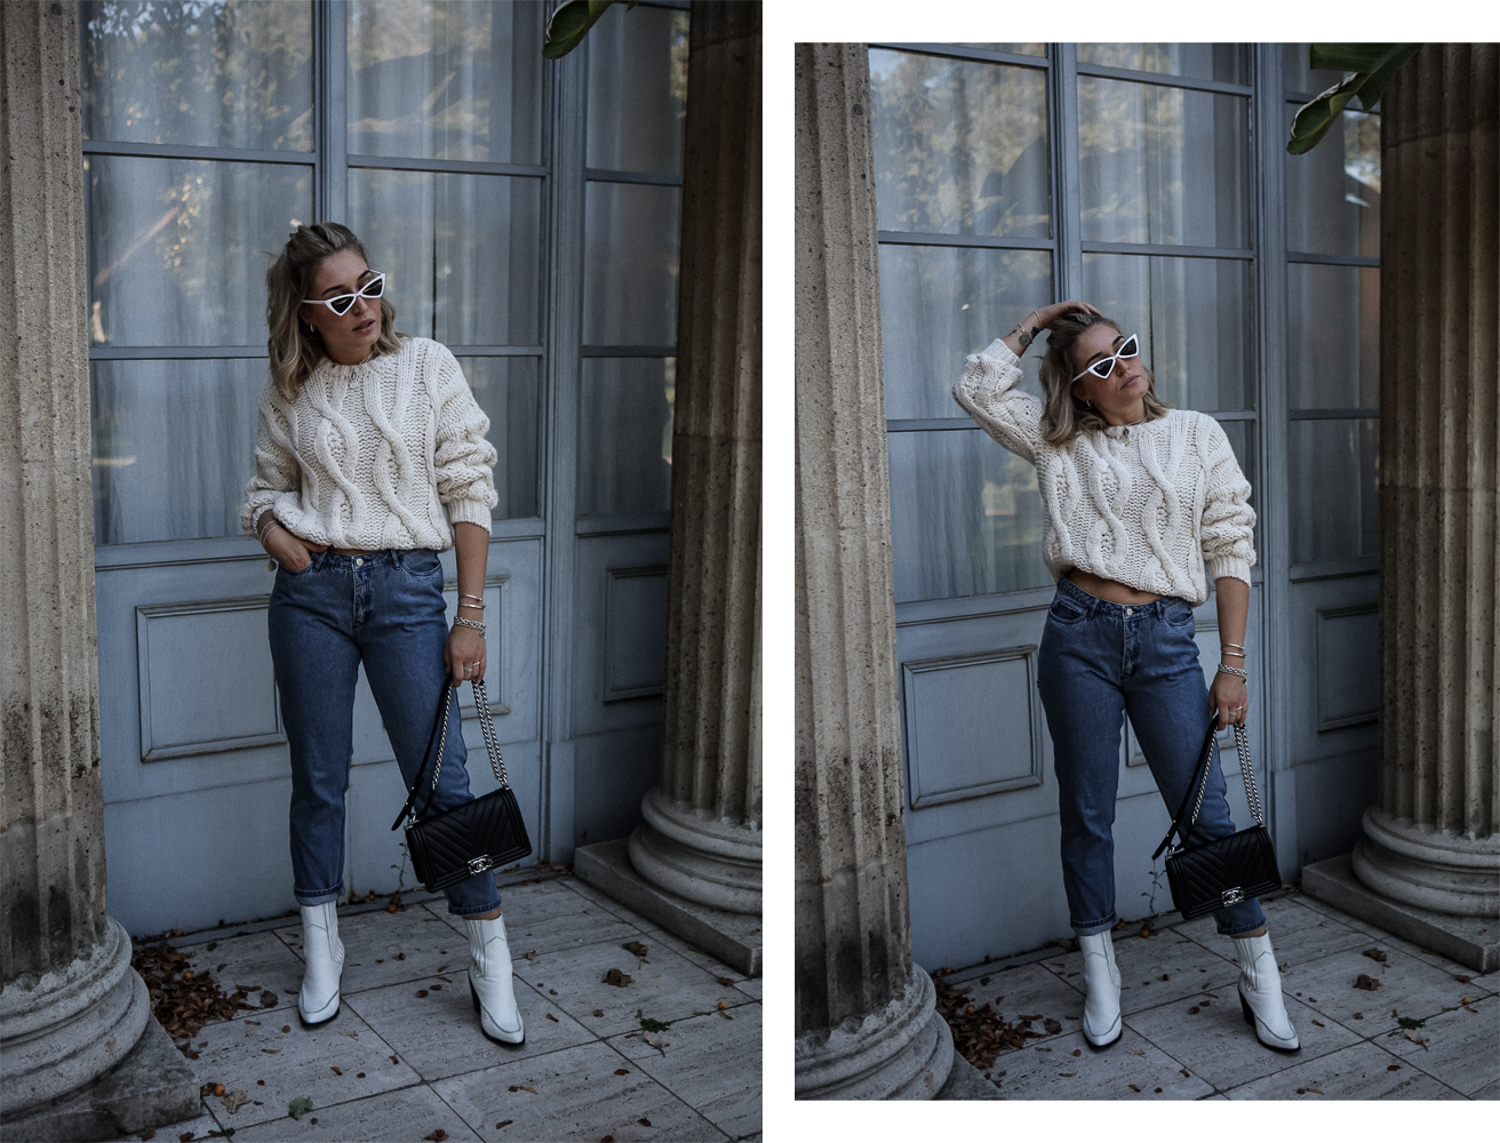  Lauralamode Strick Knit Knitwear Strickpullover Outit Ootd Mango Nakd Chanel Only Look Streetstyle Winter Berlin Fashionblogger Blogger Munich4